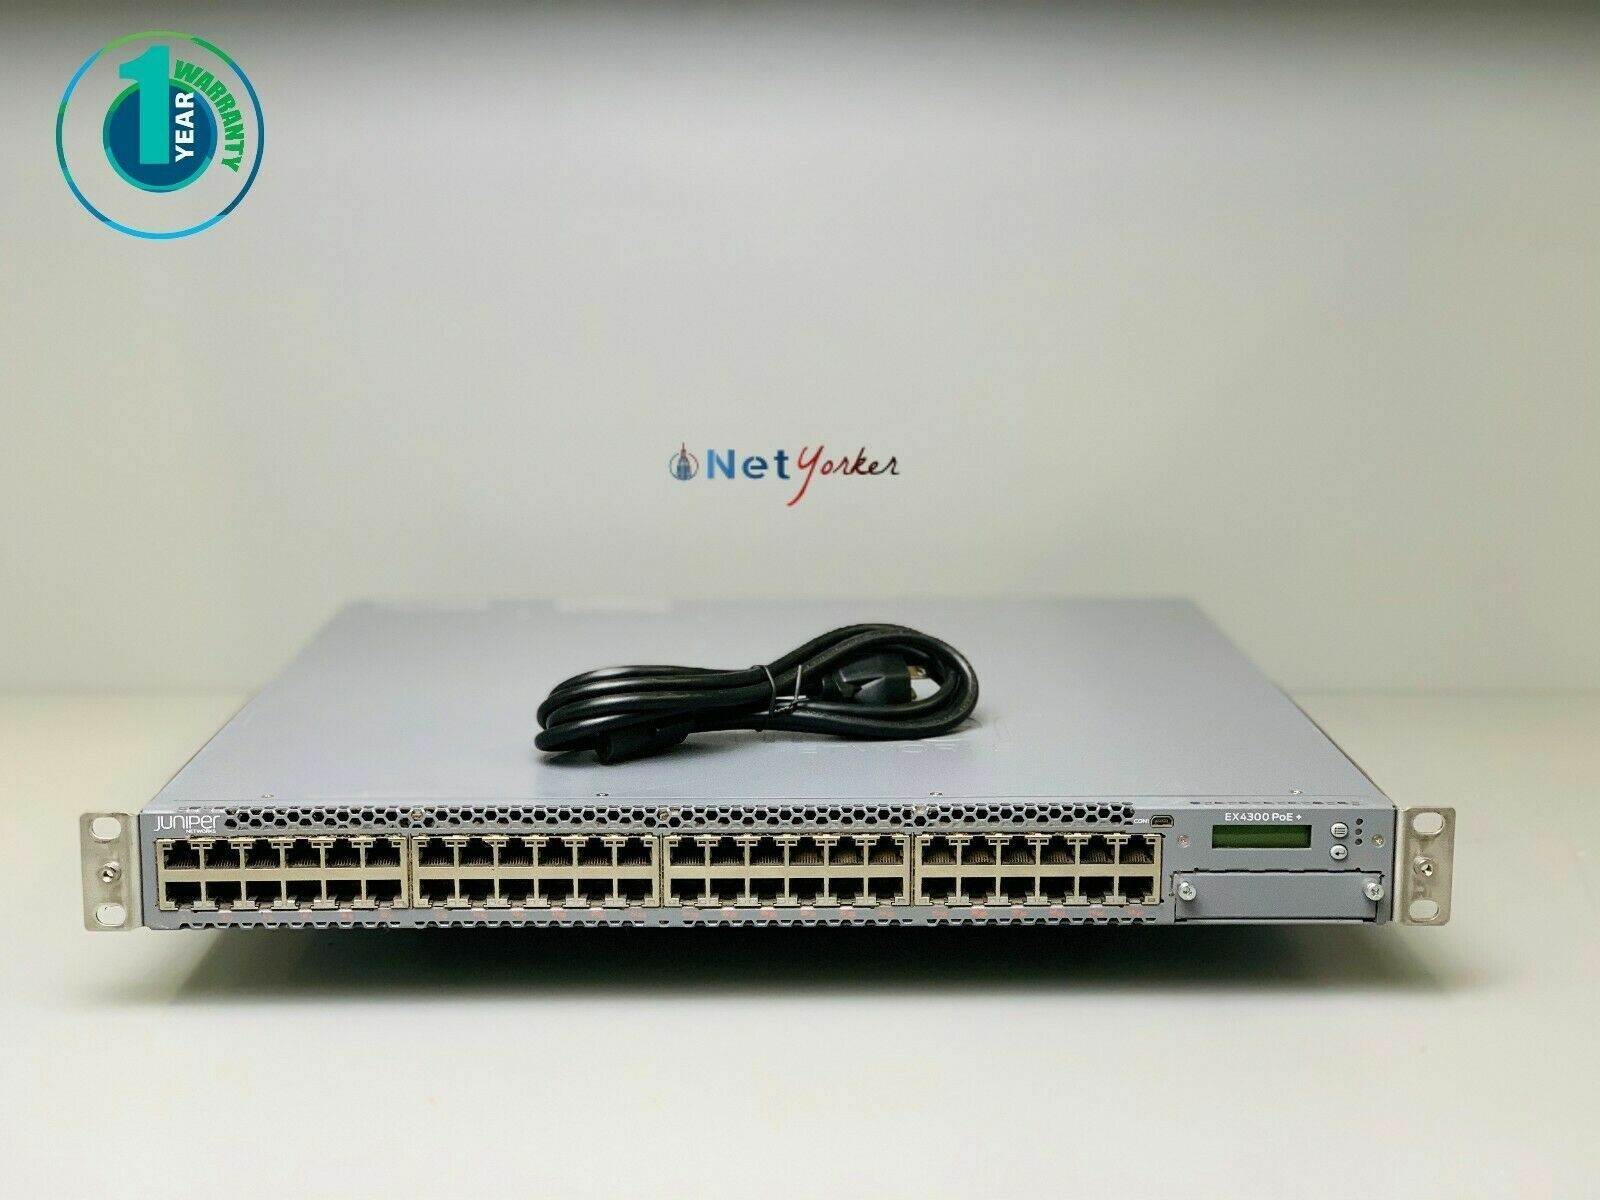 Juniper EX4300-48P 48 Port PoE Gigabit Network Switch - COMES WITH DUAL POWER